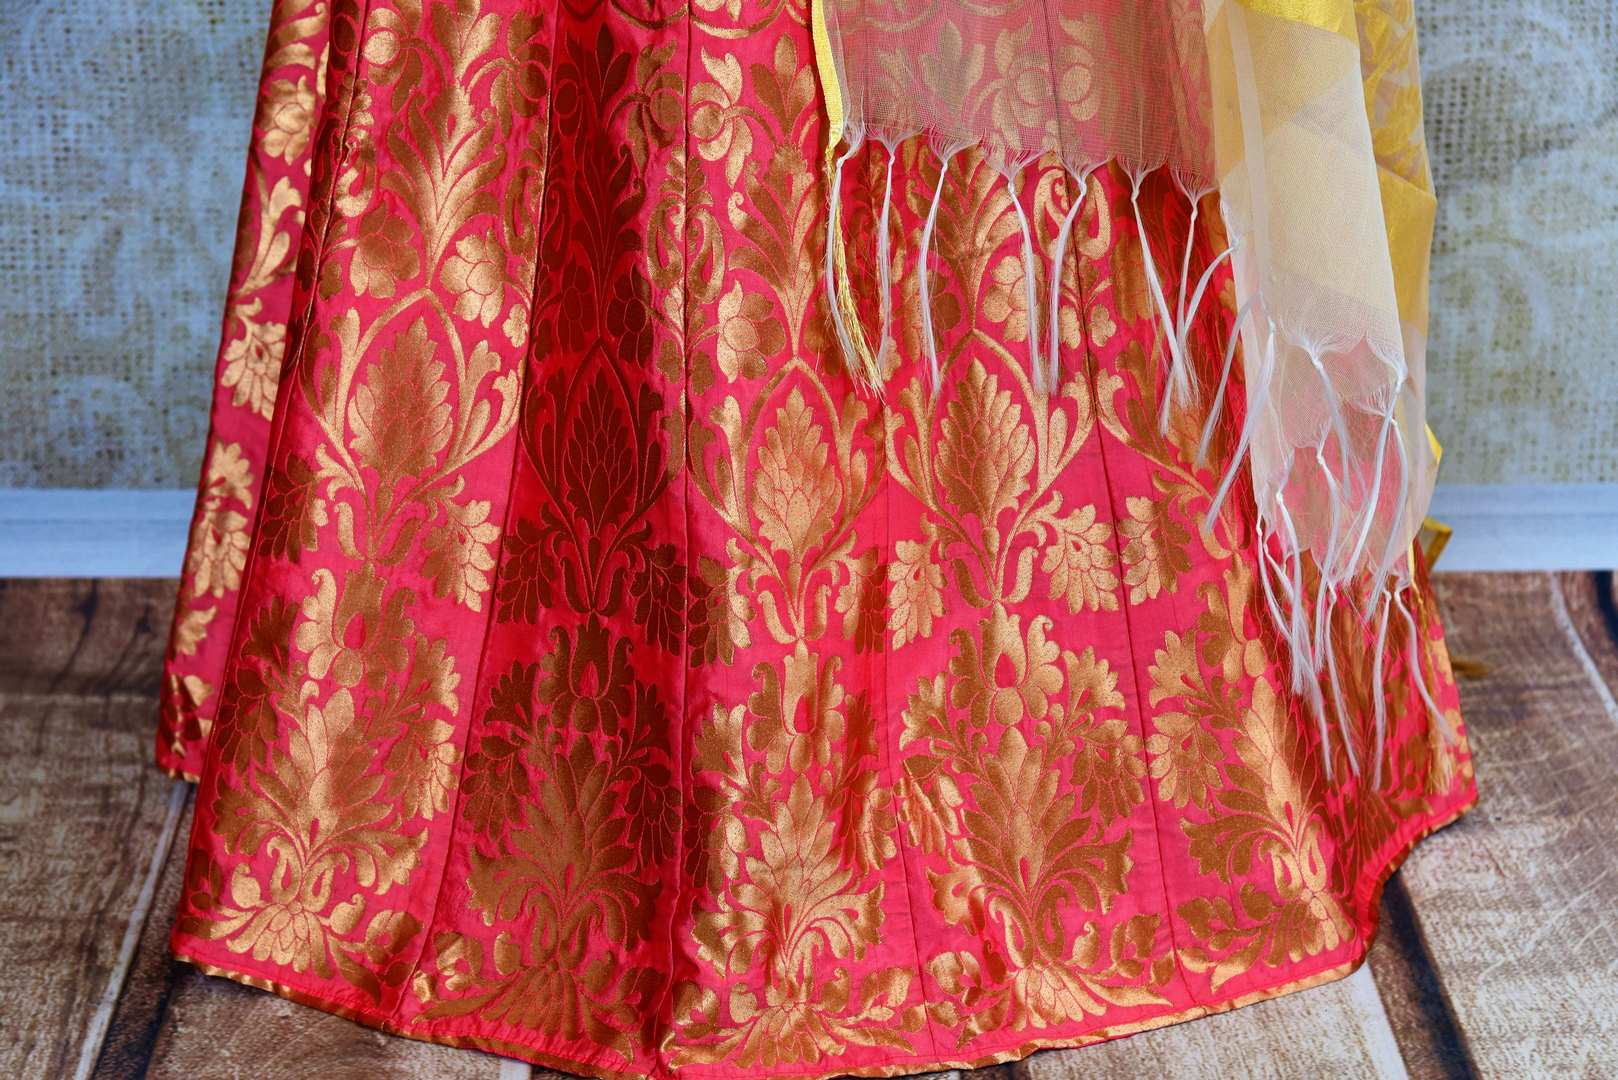 Buy yellow and pink silk lehenga online in usa with zardozi work. Pure Elegance fashion store brings an exquisite range of Indian designer lehengas in USA for women.-skirt